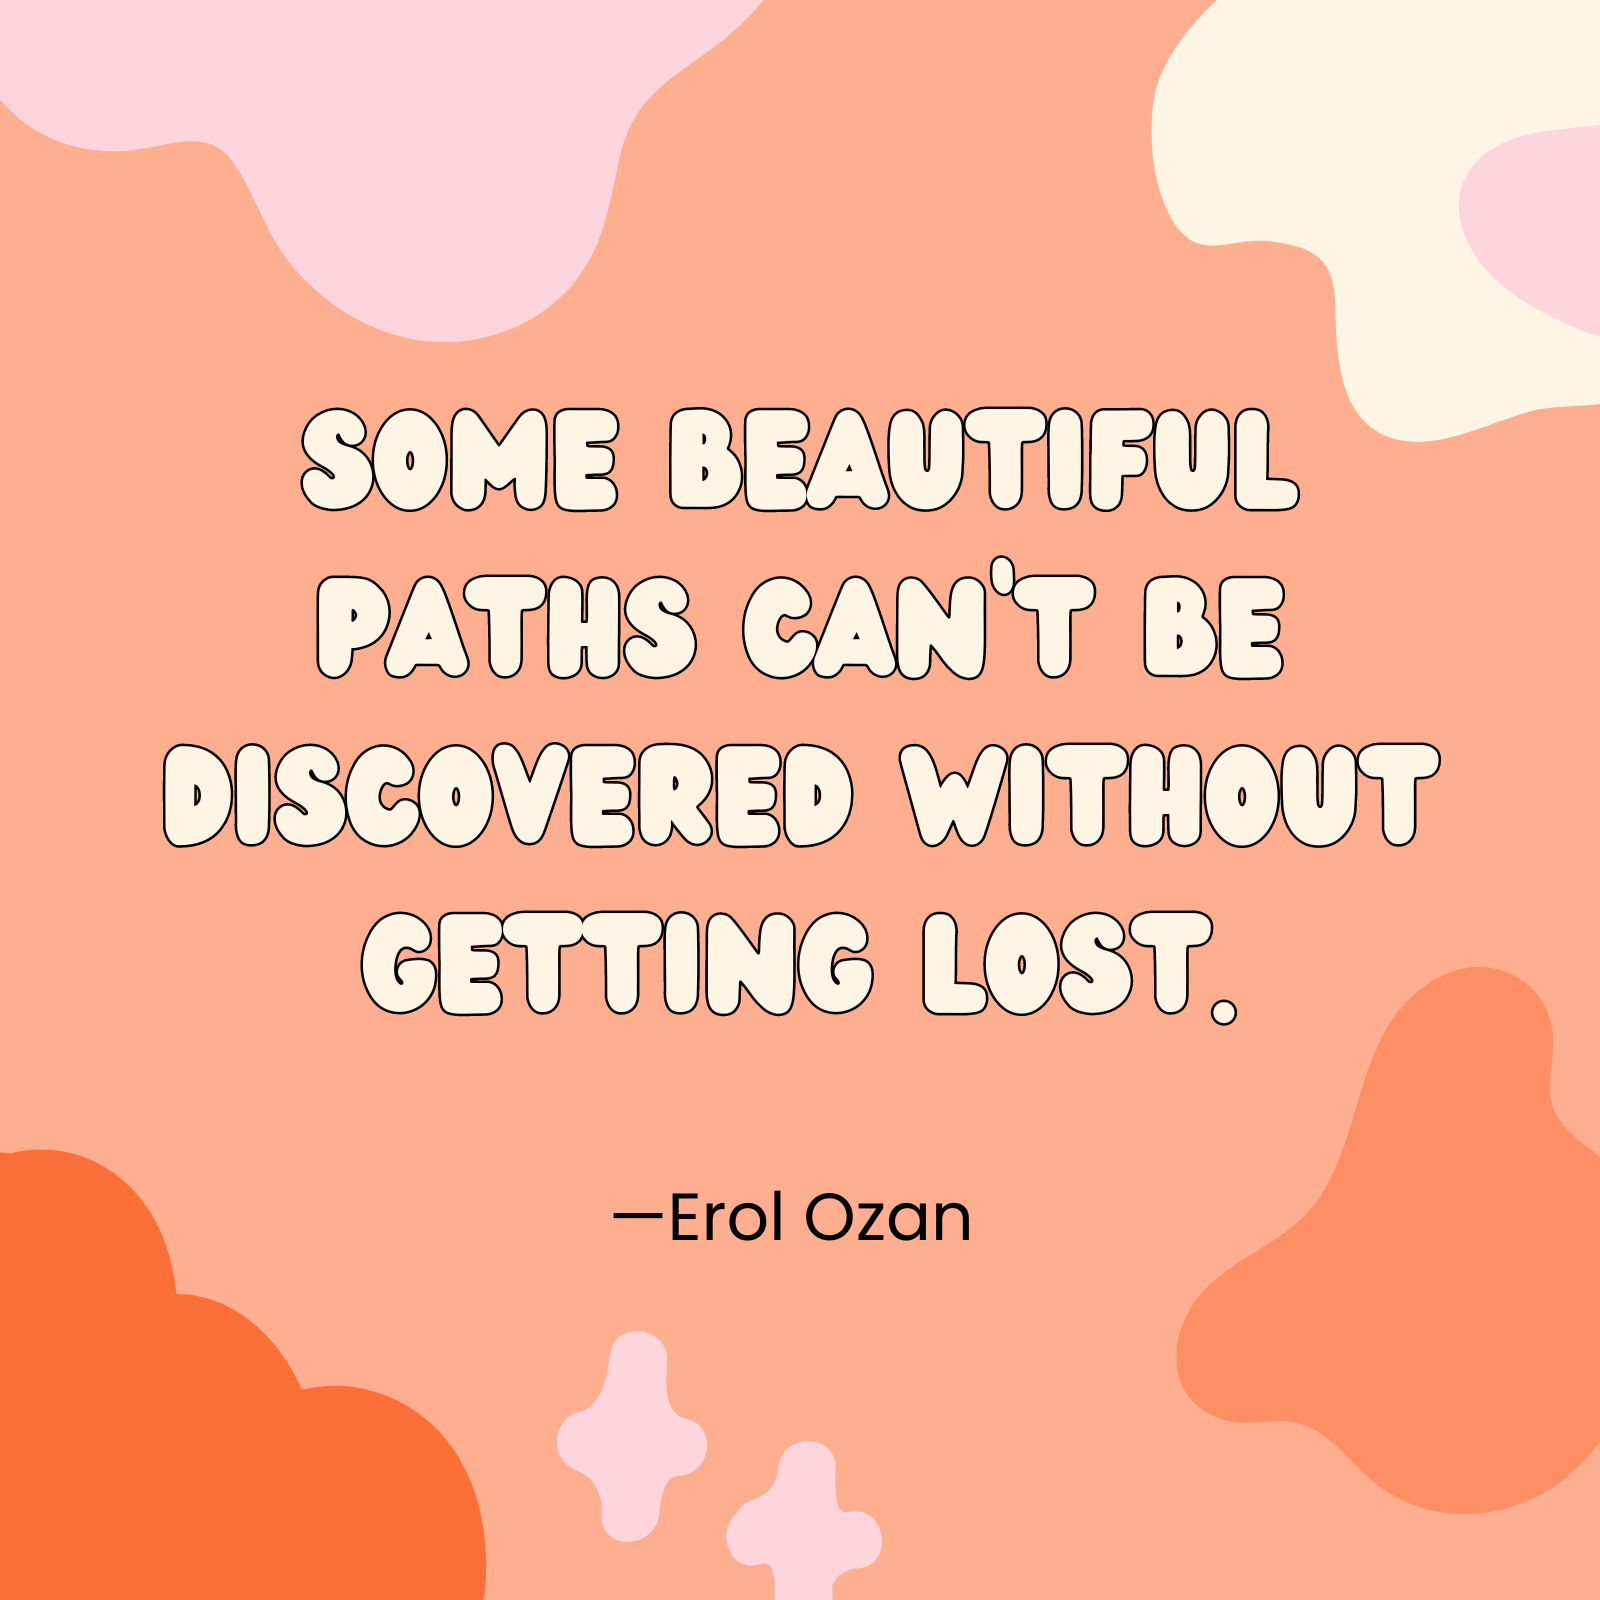 <p>"Some beautiful paths can't be discovered without getting lost." —Erol Ozan</p>